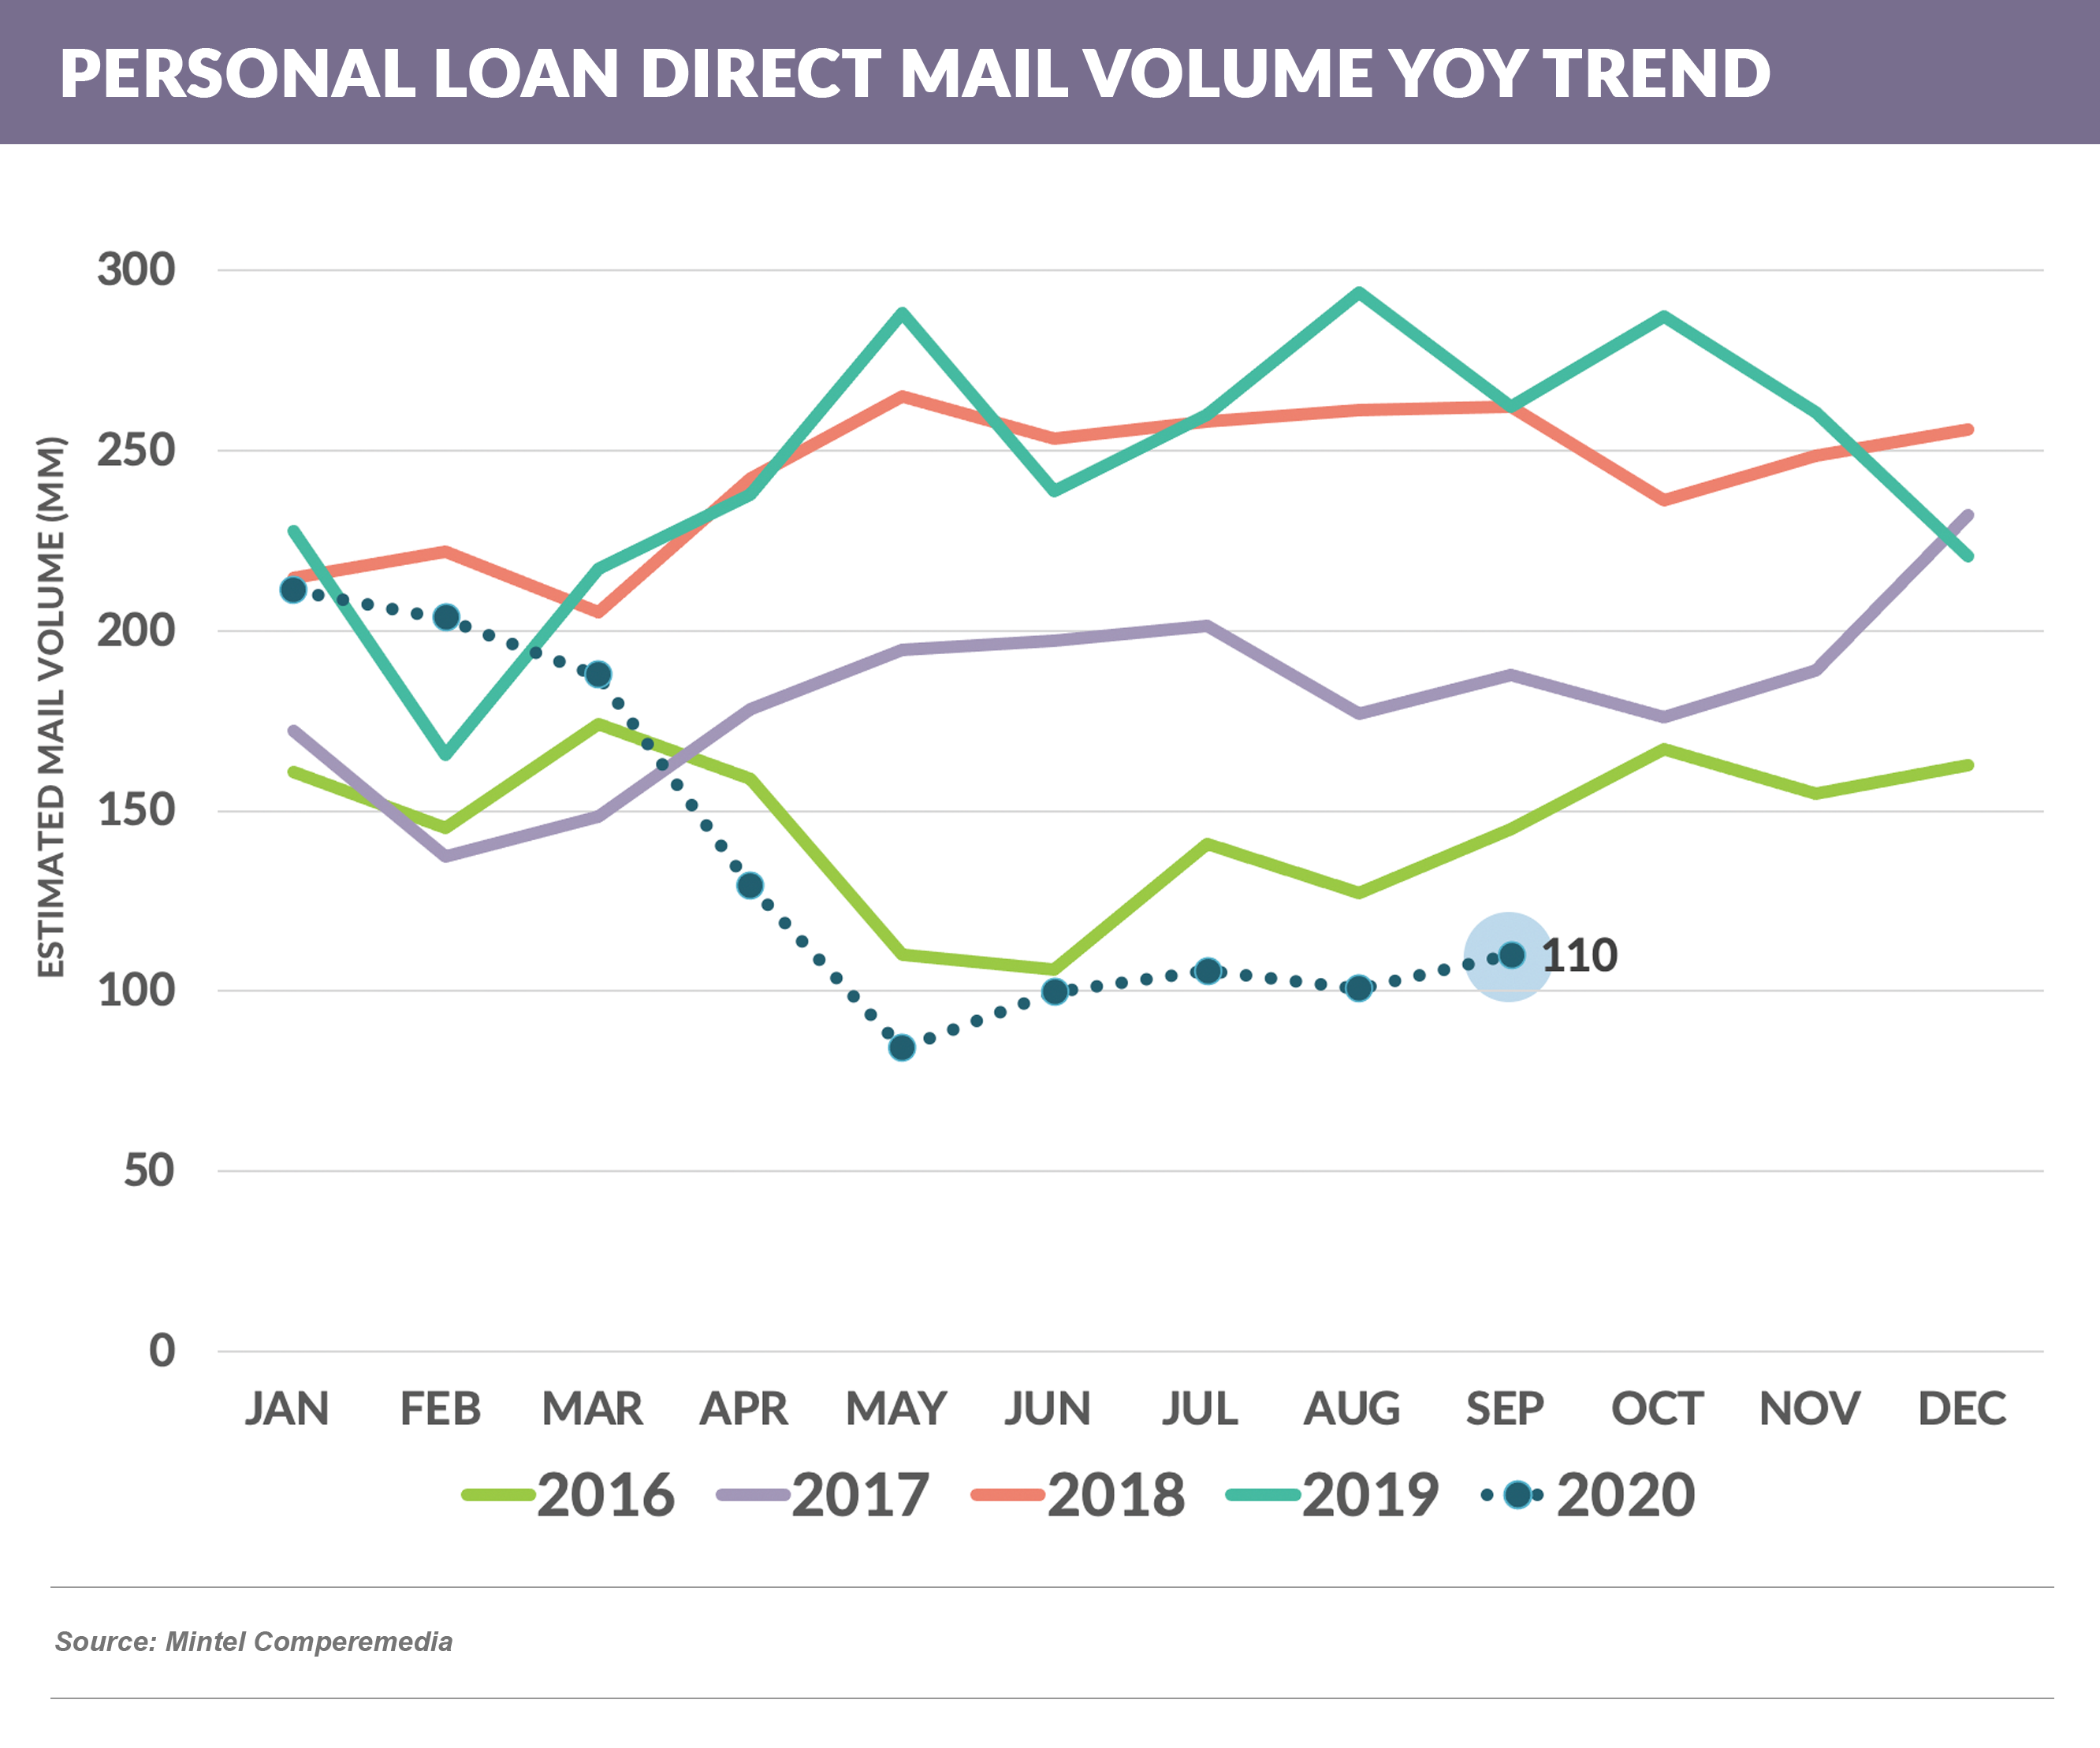 PERSONAL LOAN DIRECT MAIL VOLUME YOY 20201024